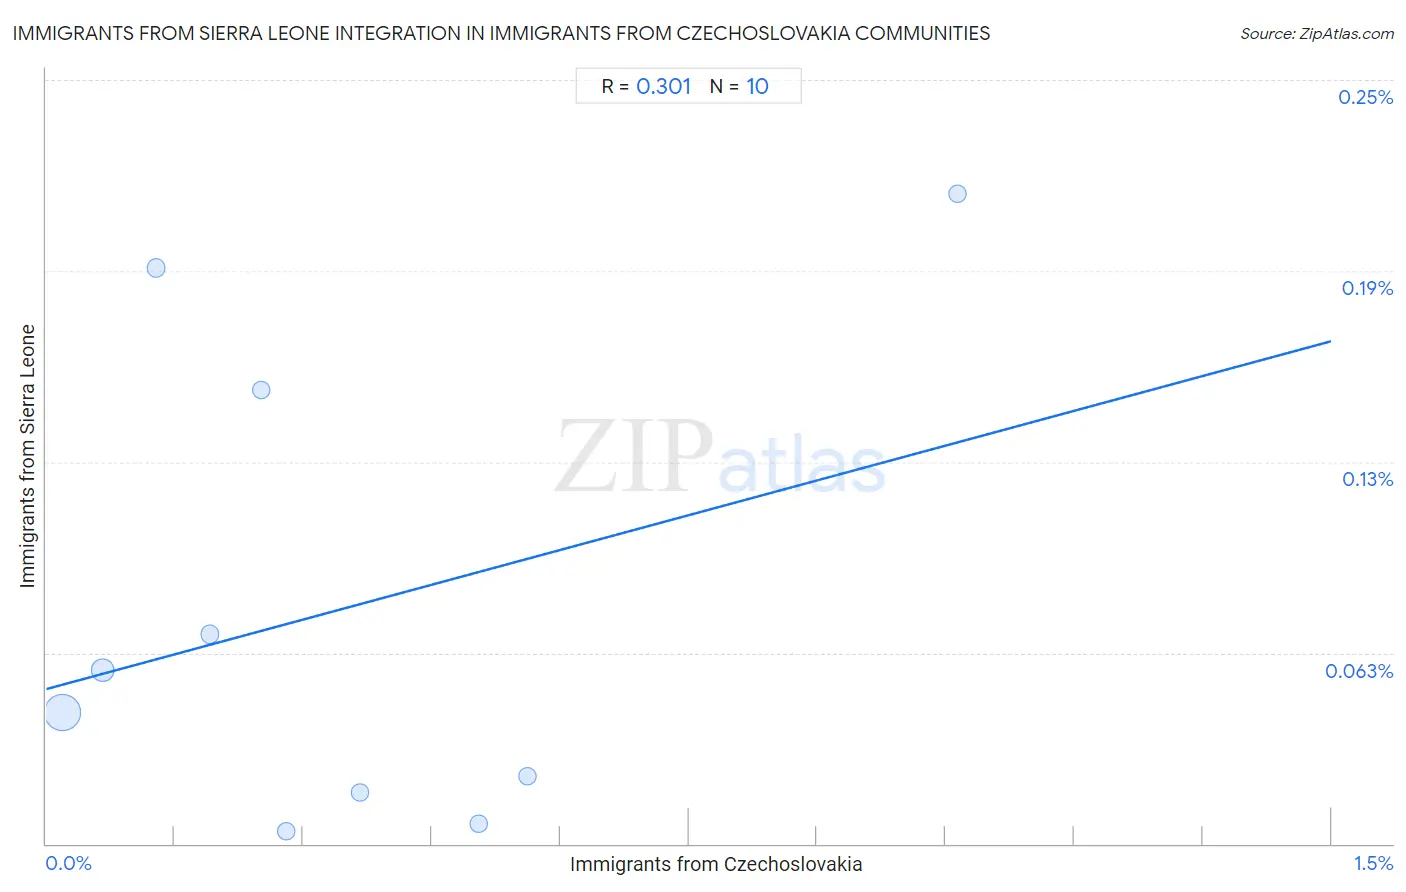 Immigrants from Czechoslovakia Integration in Immigrants from Sierra Leone Communities